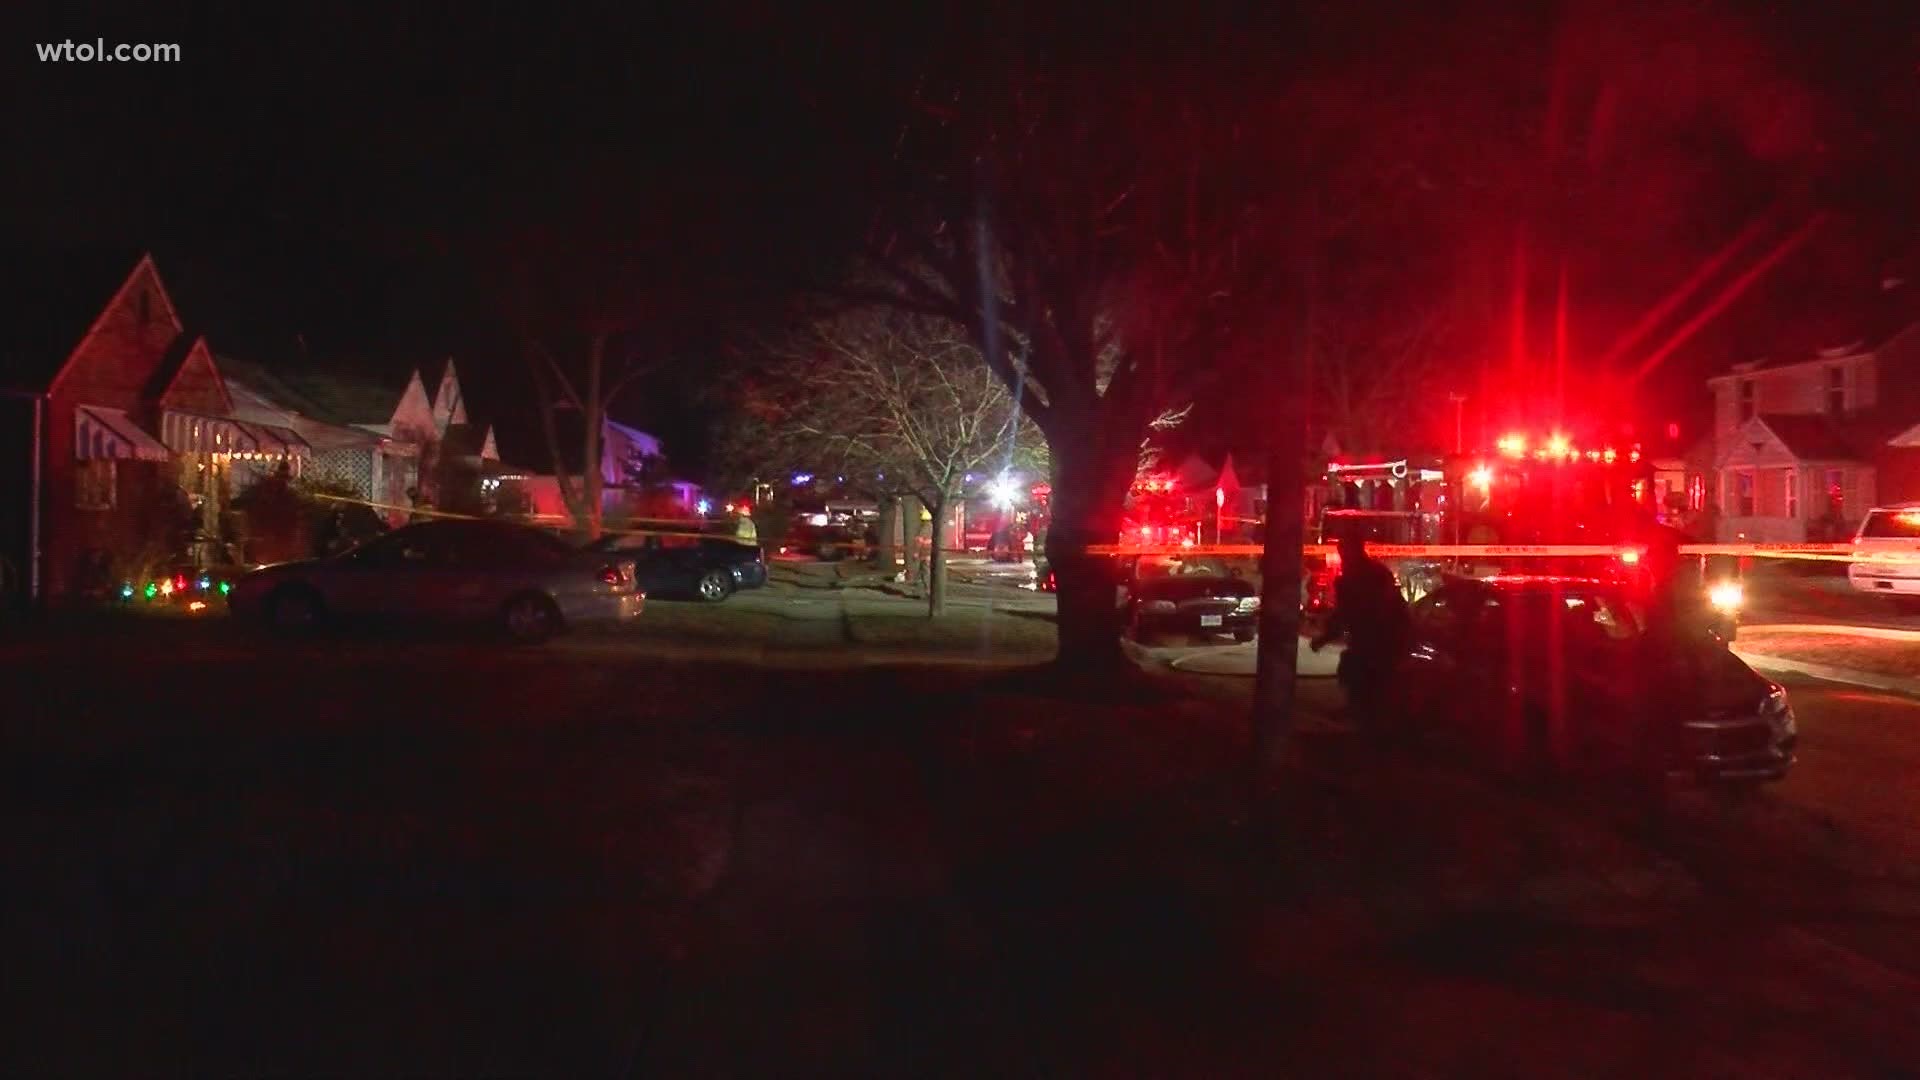 A male in the front room was found dead, crews tell WTOL 11.